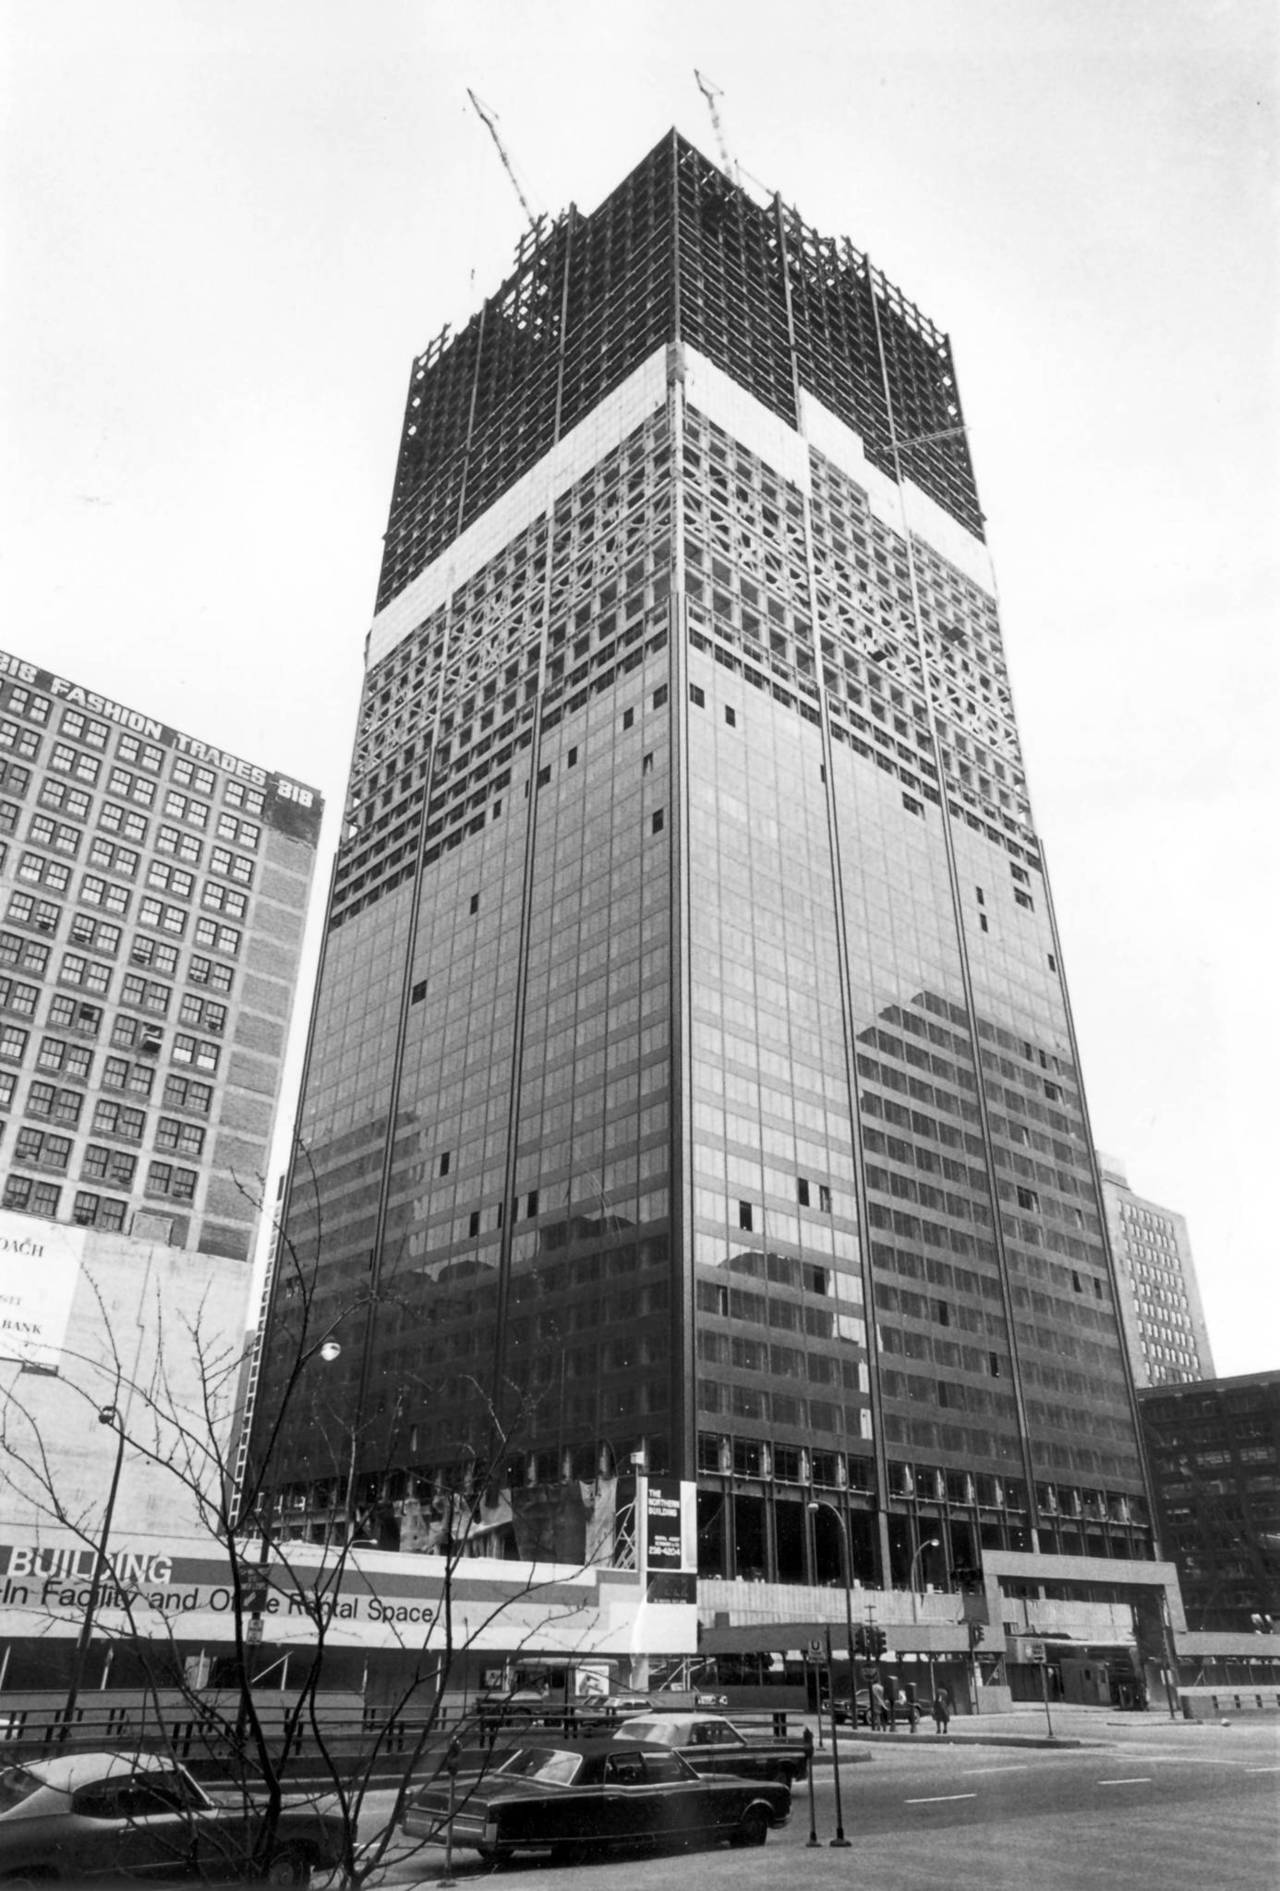 Amazing Historical Photo of Sears Tower in 1972 